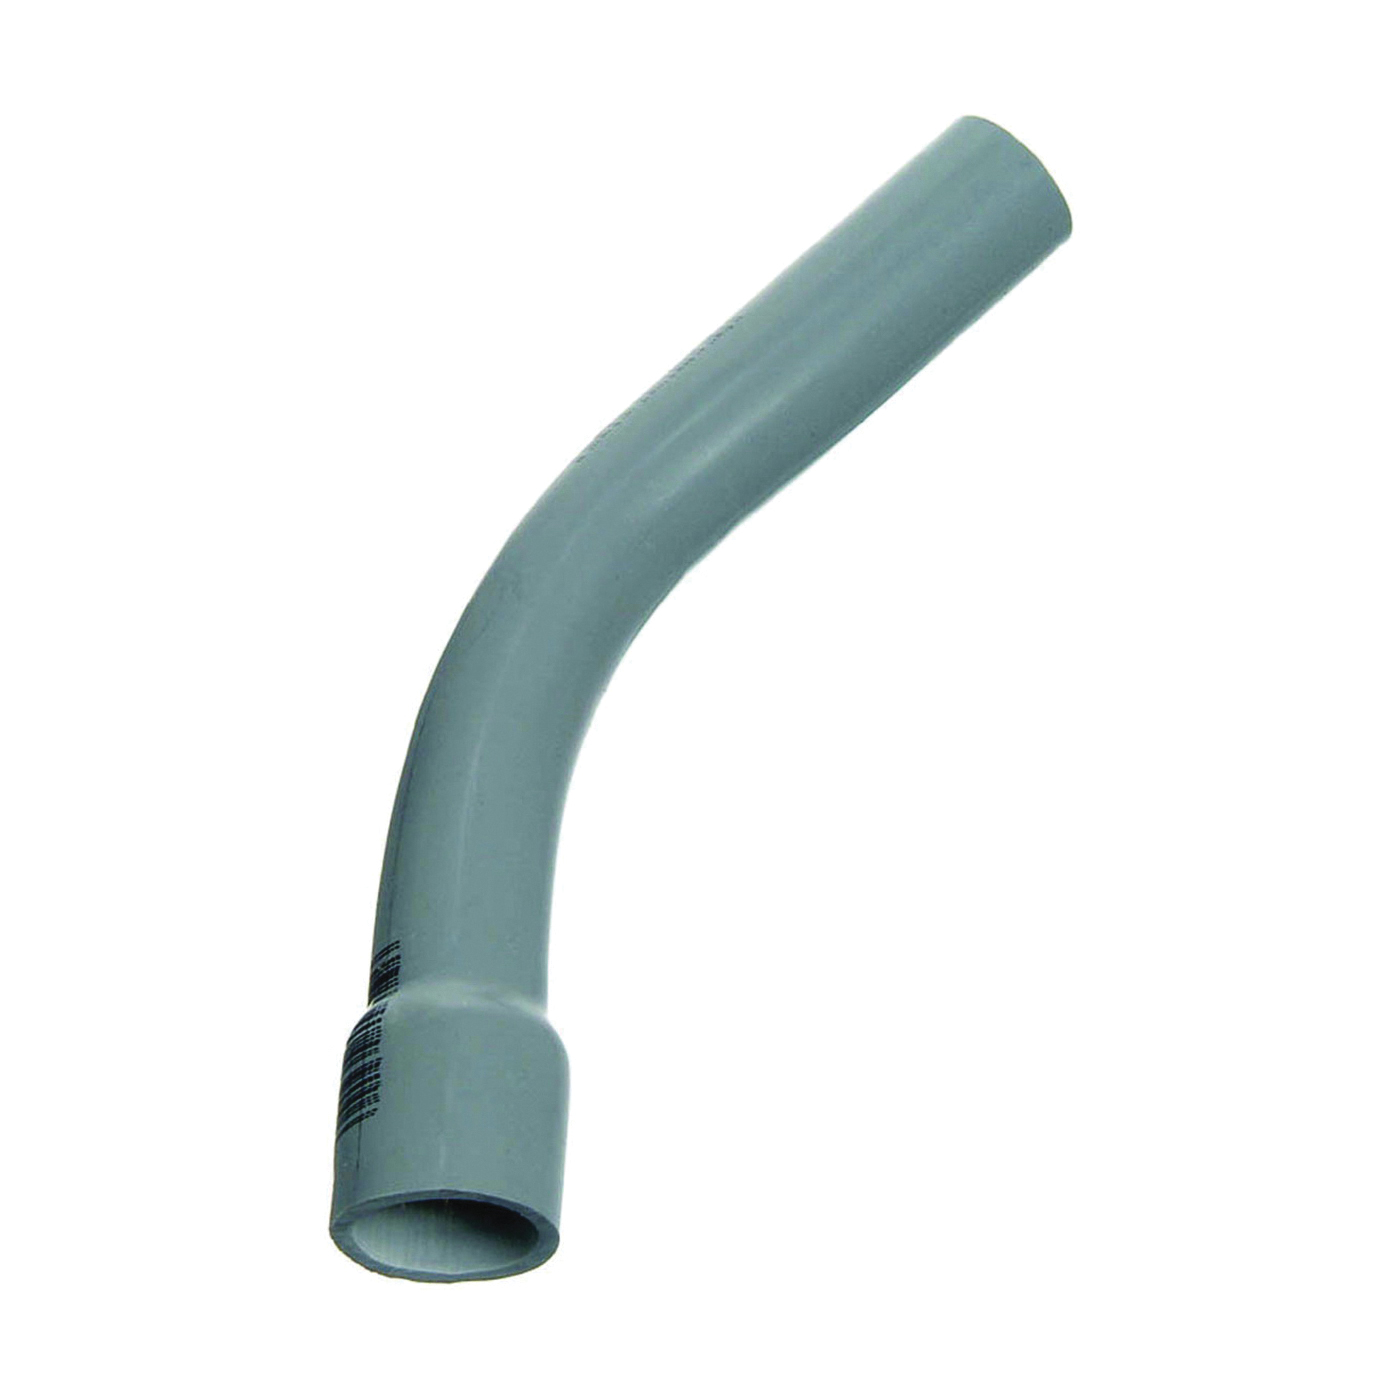 Carlon UA7AKB-CAR Elbow, 2-1/2 in Trade Size, 45 deg Angle, SCH 40 Schedule Rating, PVC, Bell End, Gray